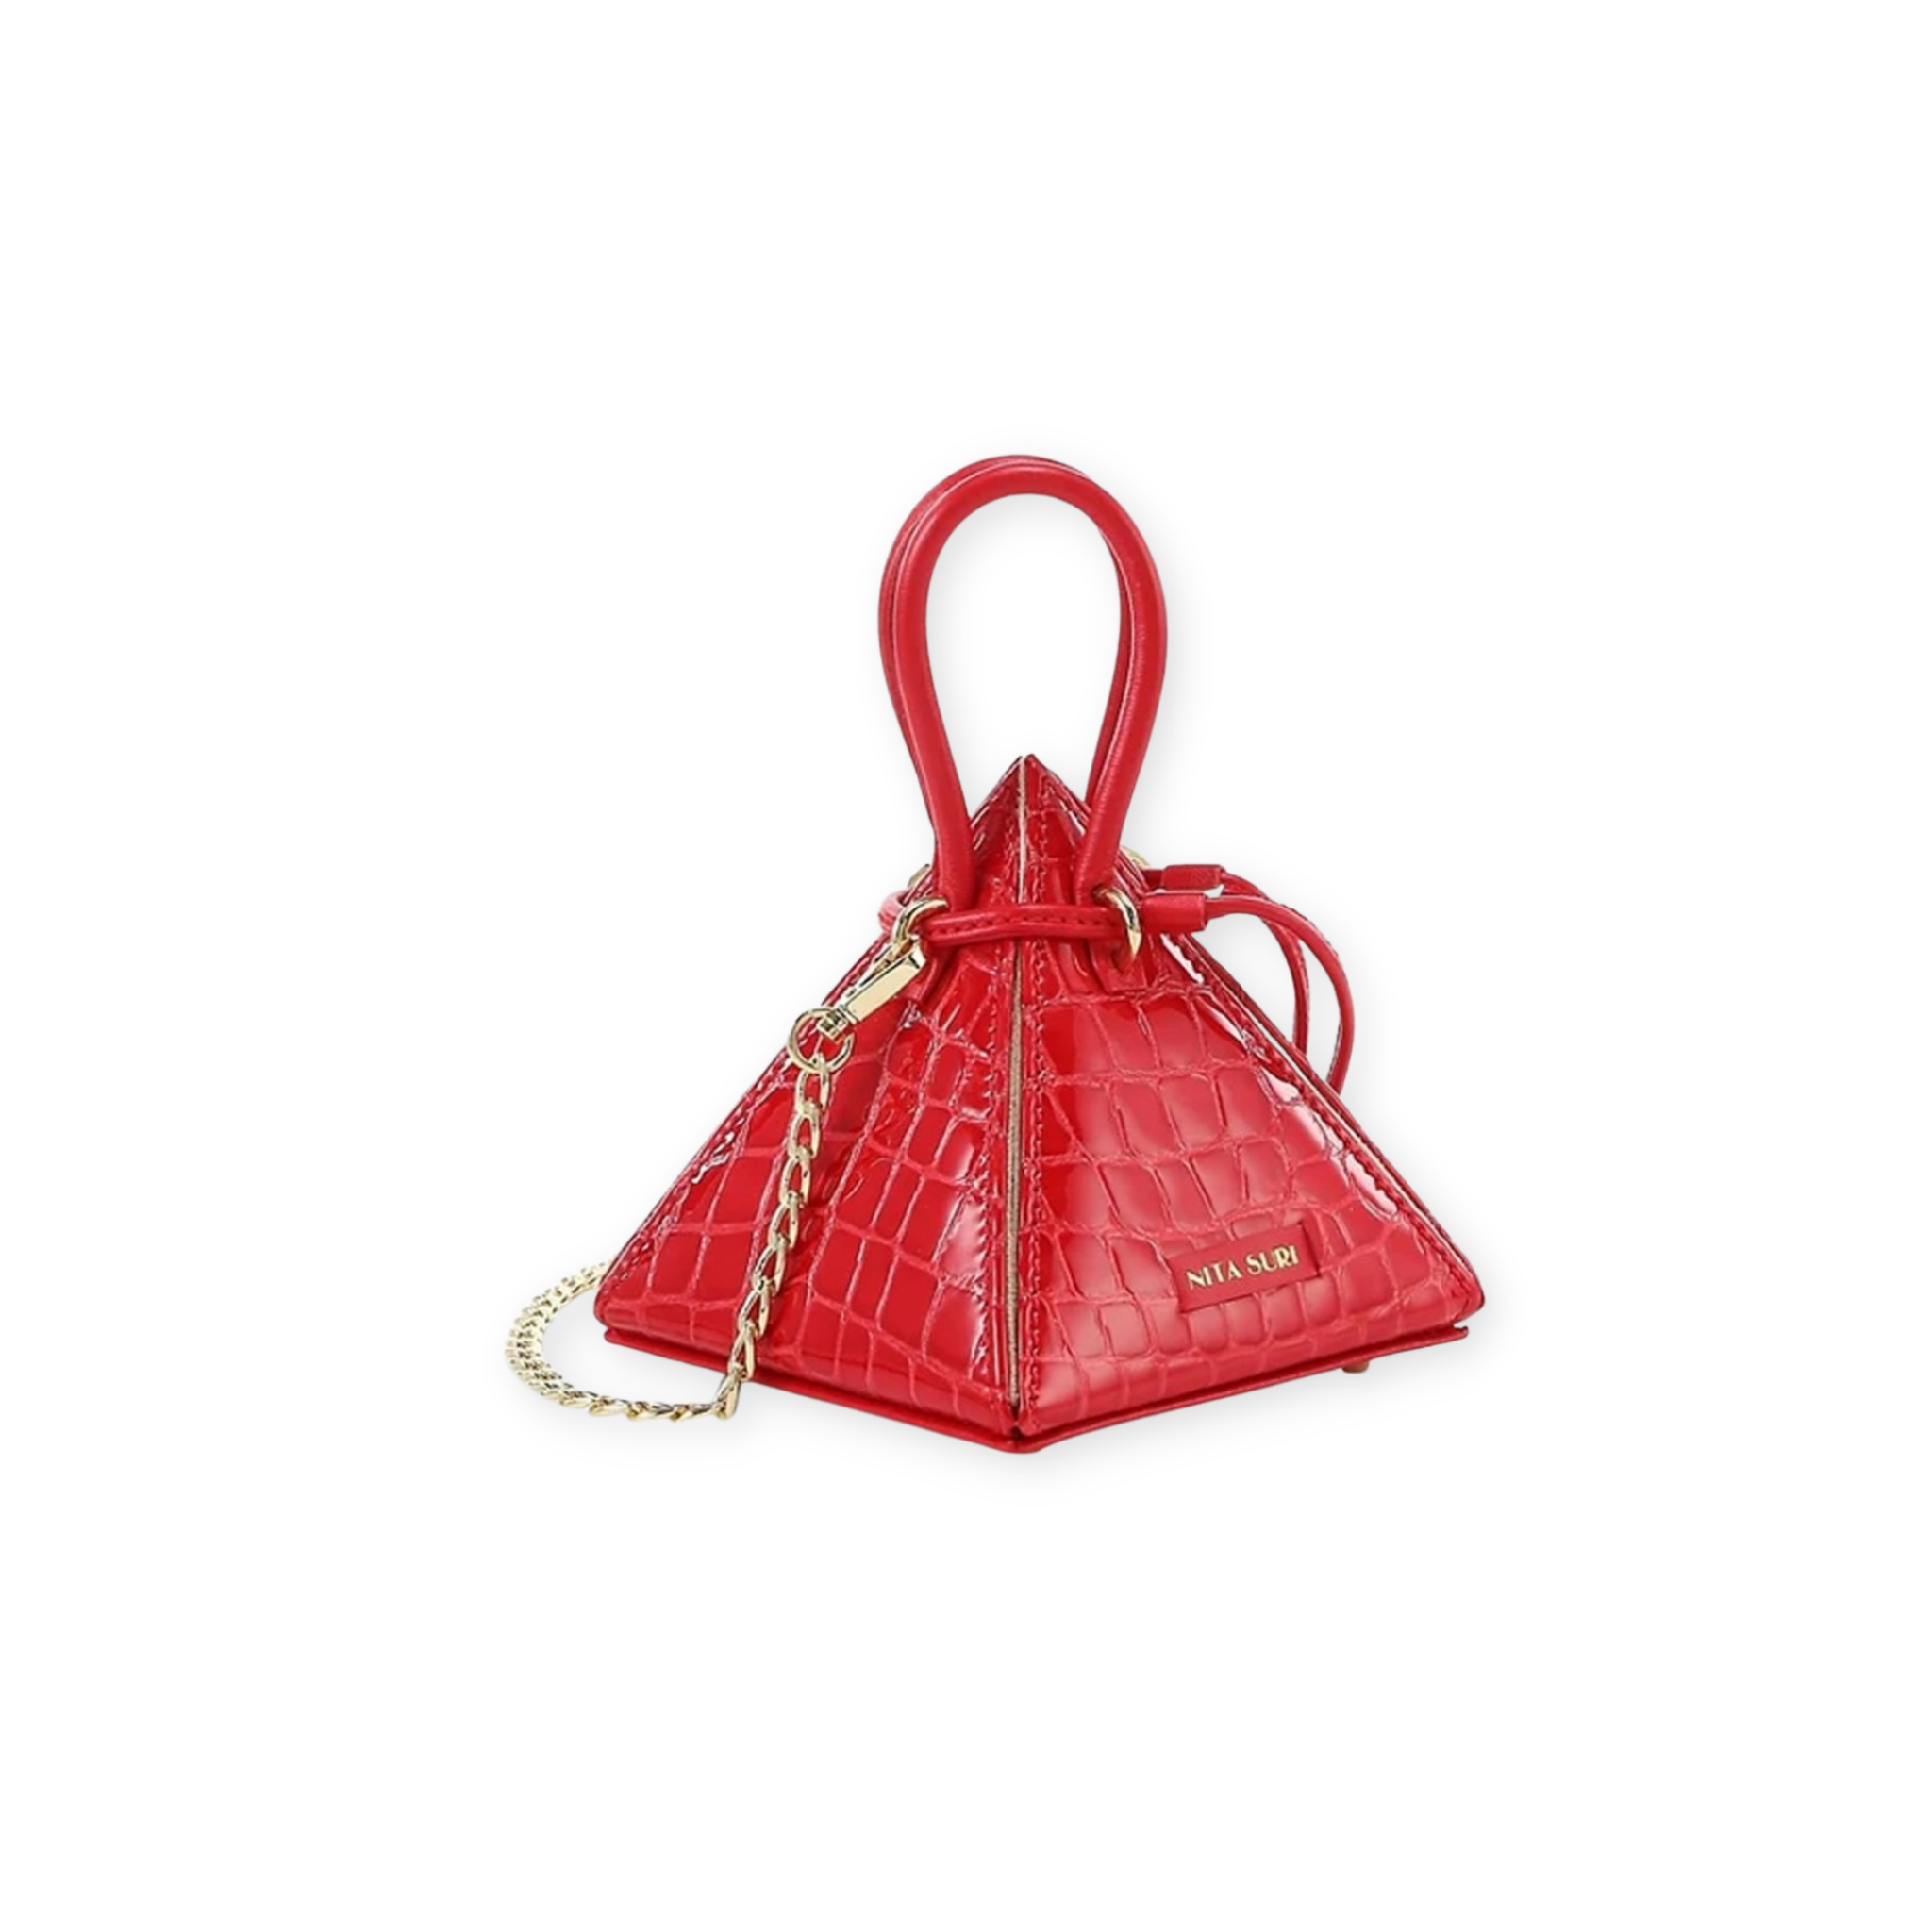 Buy now the Exotic LIA Mini bag inspired by the geometric shapes of our designer's birth city Barcelona, and its world known artist, Antonio Gaudí, architect of the world wonder La Sagrada Familia. The Exotic Lia Croc-Embossed Passion Red Mini bag has a unique and functional pyramidal design able to fit all your essentials. 